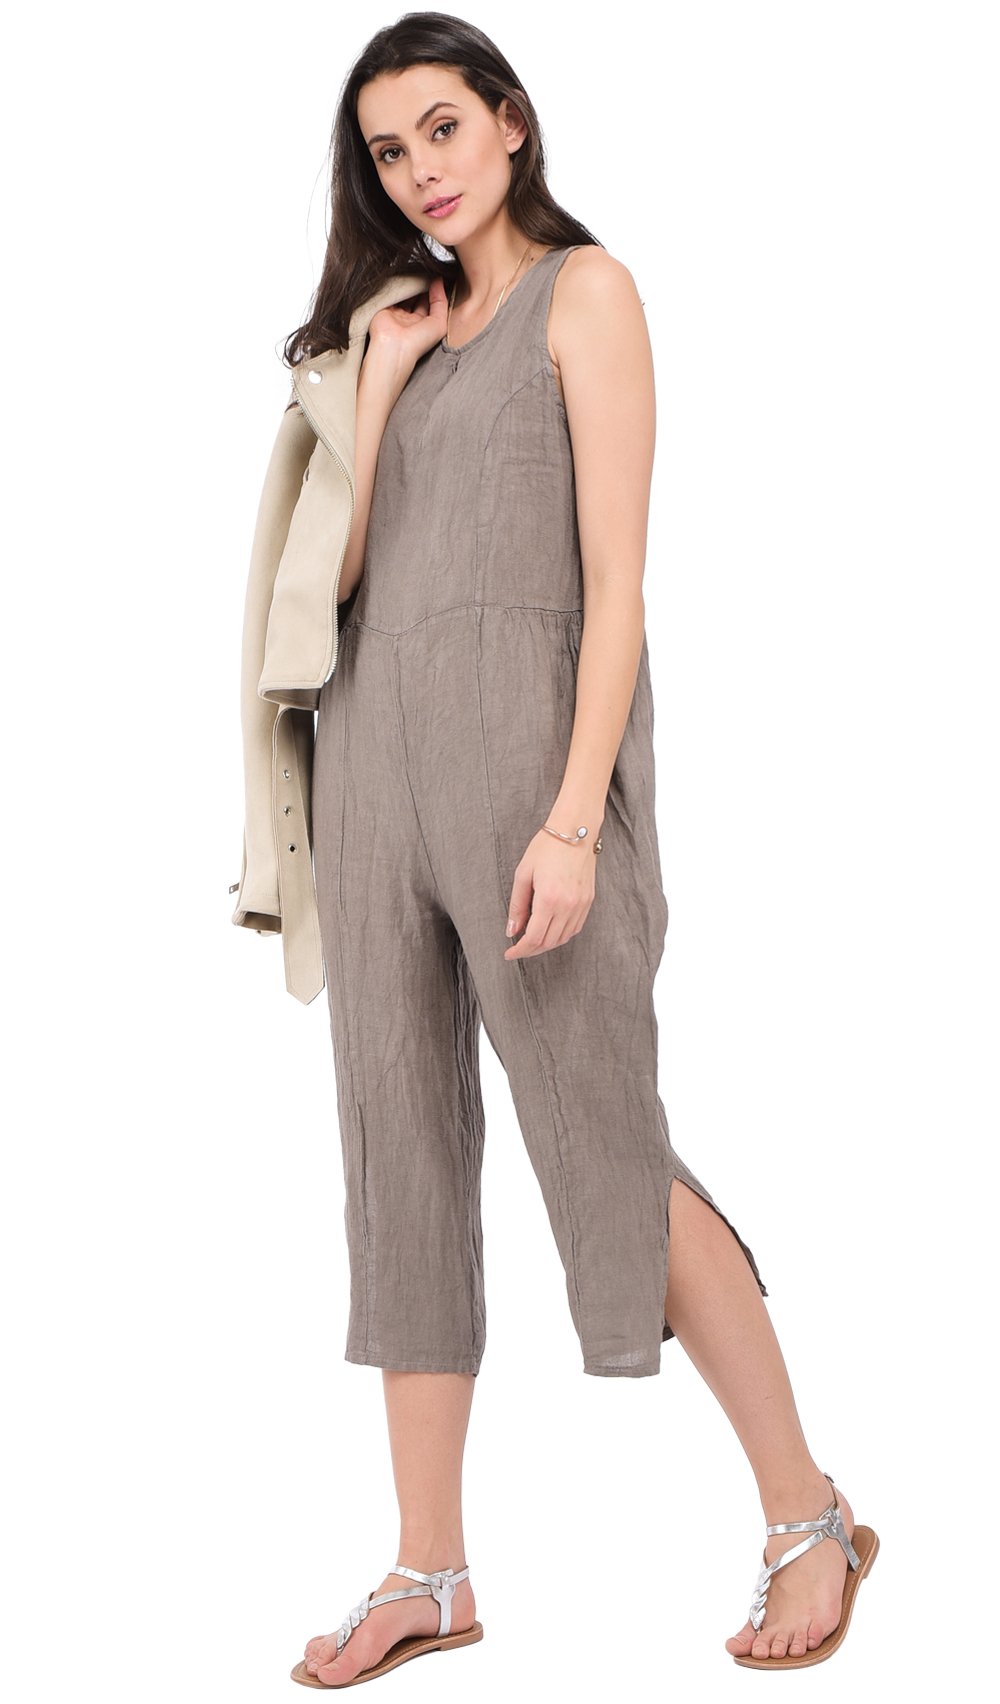 ROUND WATER DROP COLLAR JUMPSUIT WITH POCKETS AND LATERAL LEGS OPENING